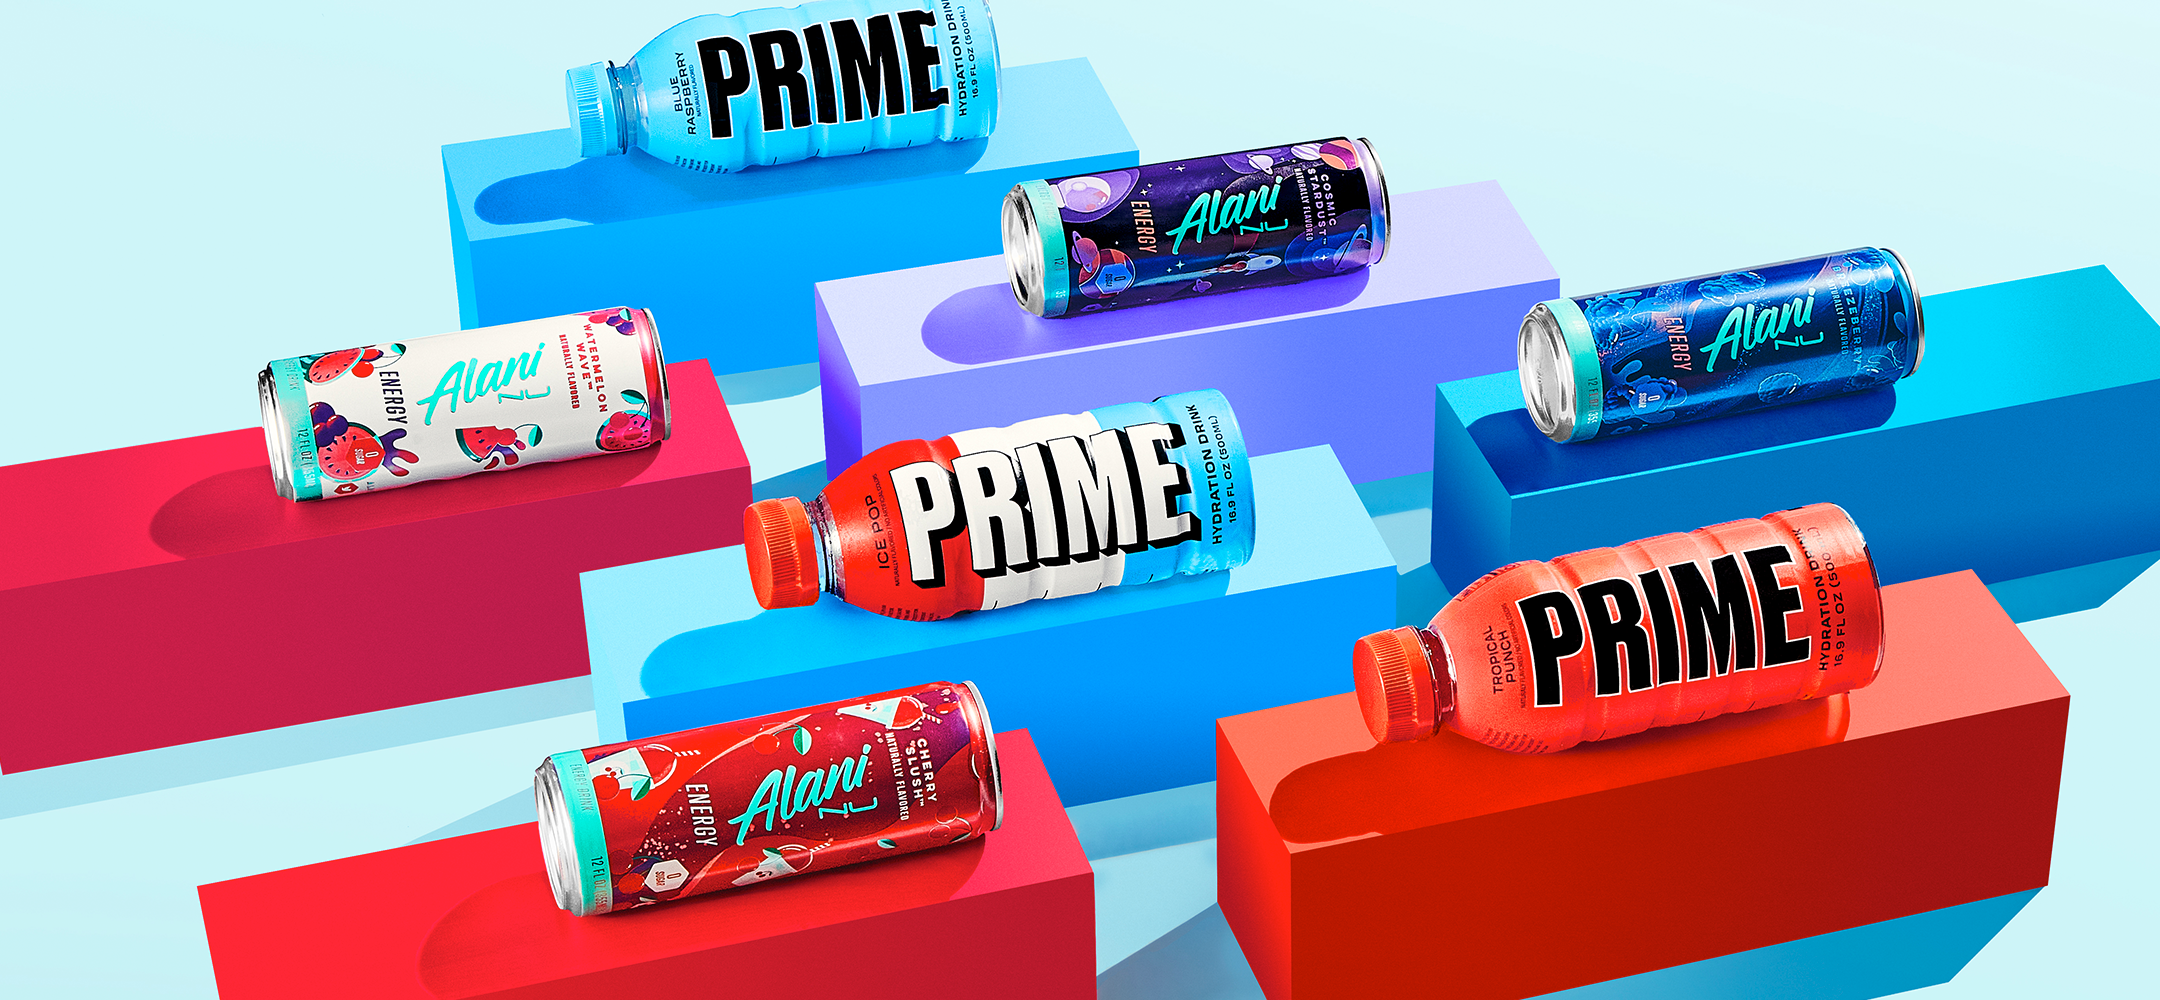 A colorful display of 'Alani' energy drink cans and 'PRIME' hydration drink bottles arranged on staggered, geometric blocks in shades of blue, pink, and red, creating a vibrant and playful composition.